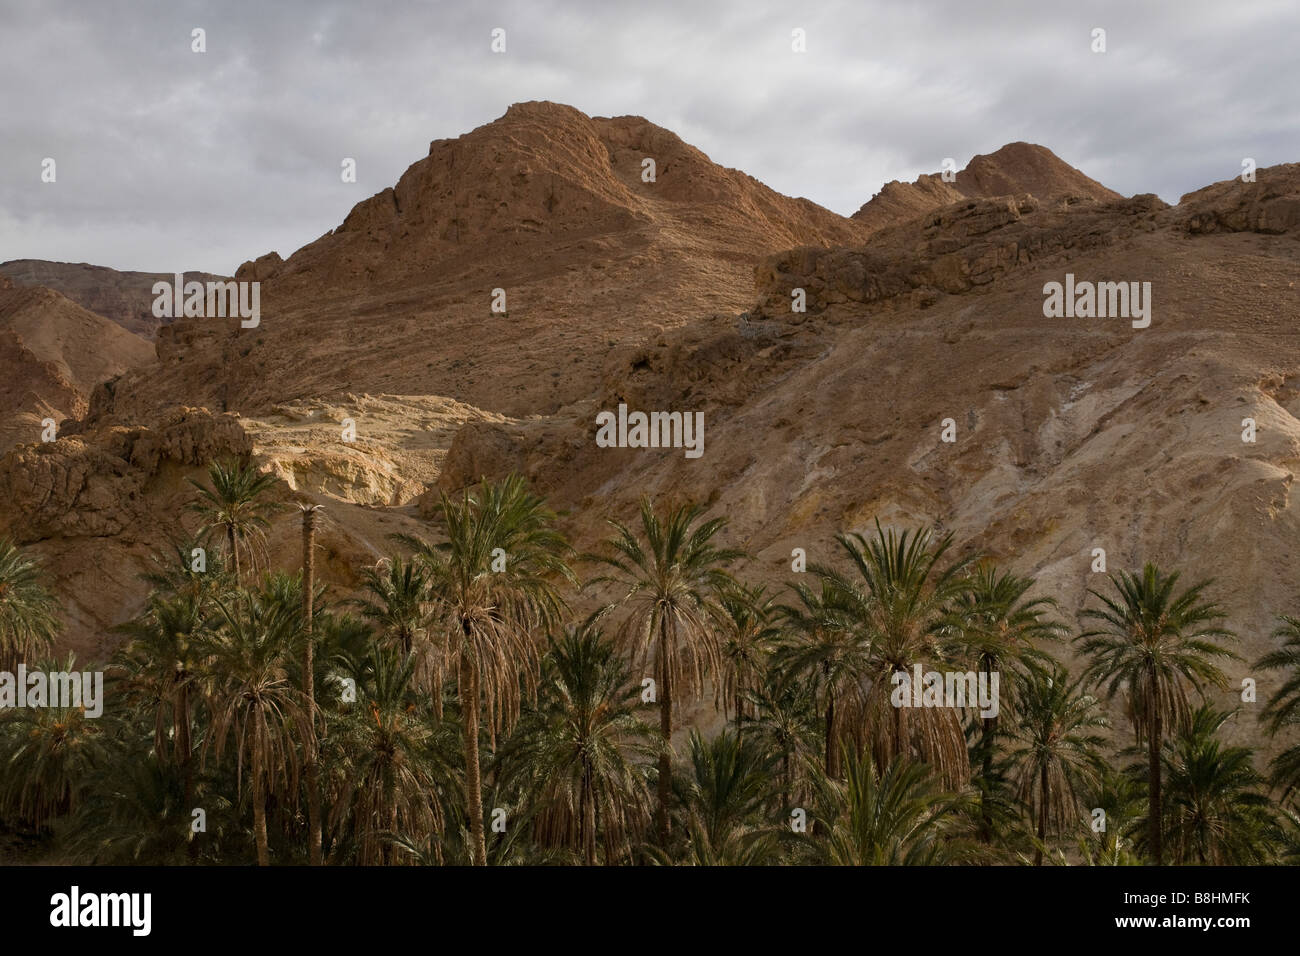 The southern Tunisian landscape is distinguished by the impressive red Atlas mountains and oases of palm groves Stock Photo